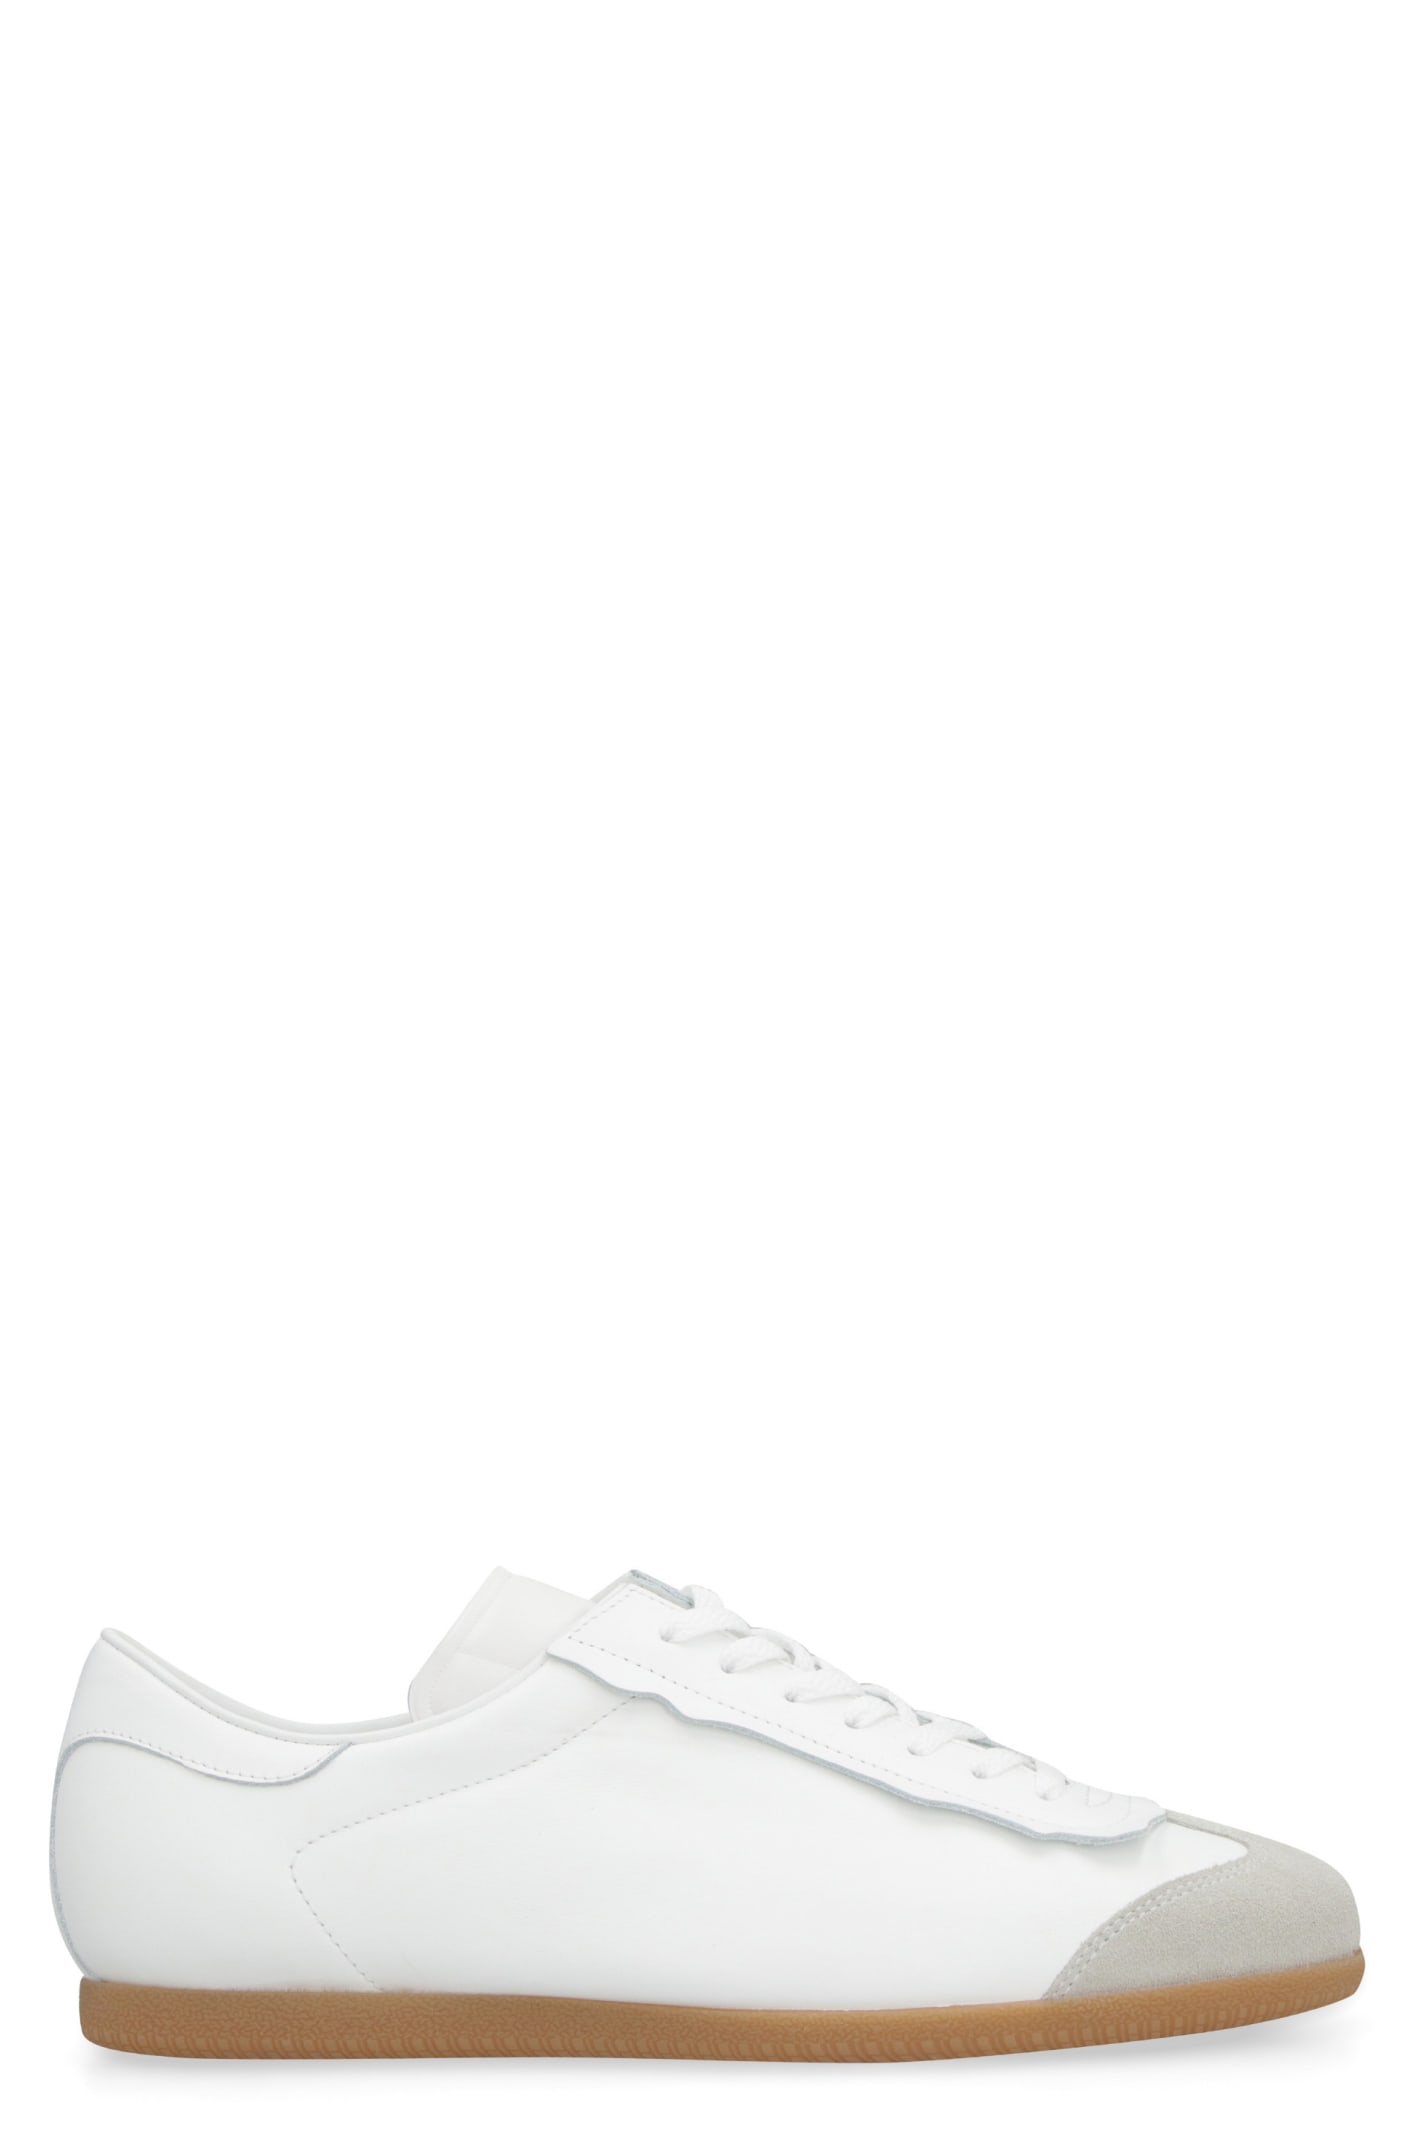 Shop Maison Margiela Featherlight Leather Sneakers In White